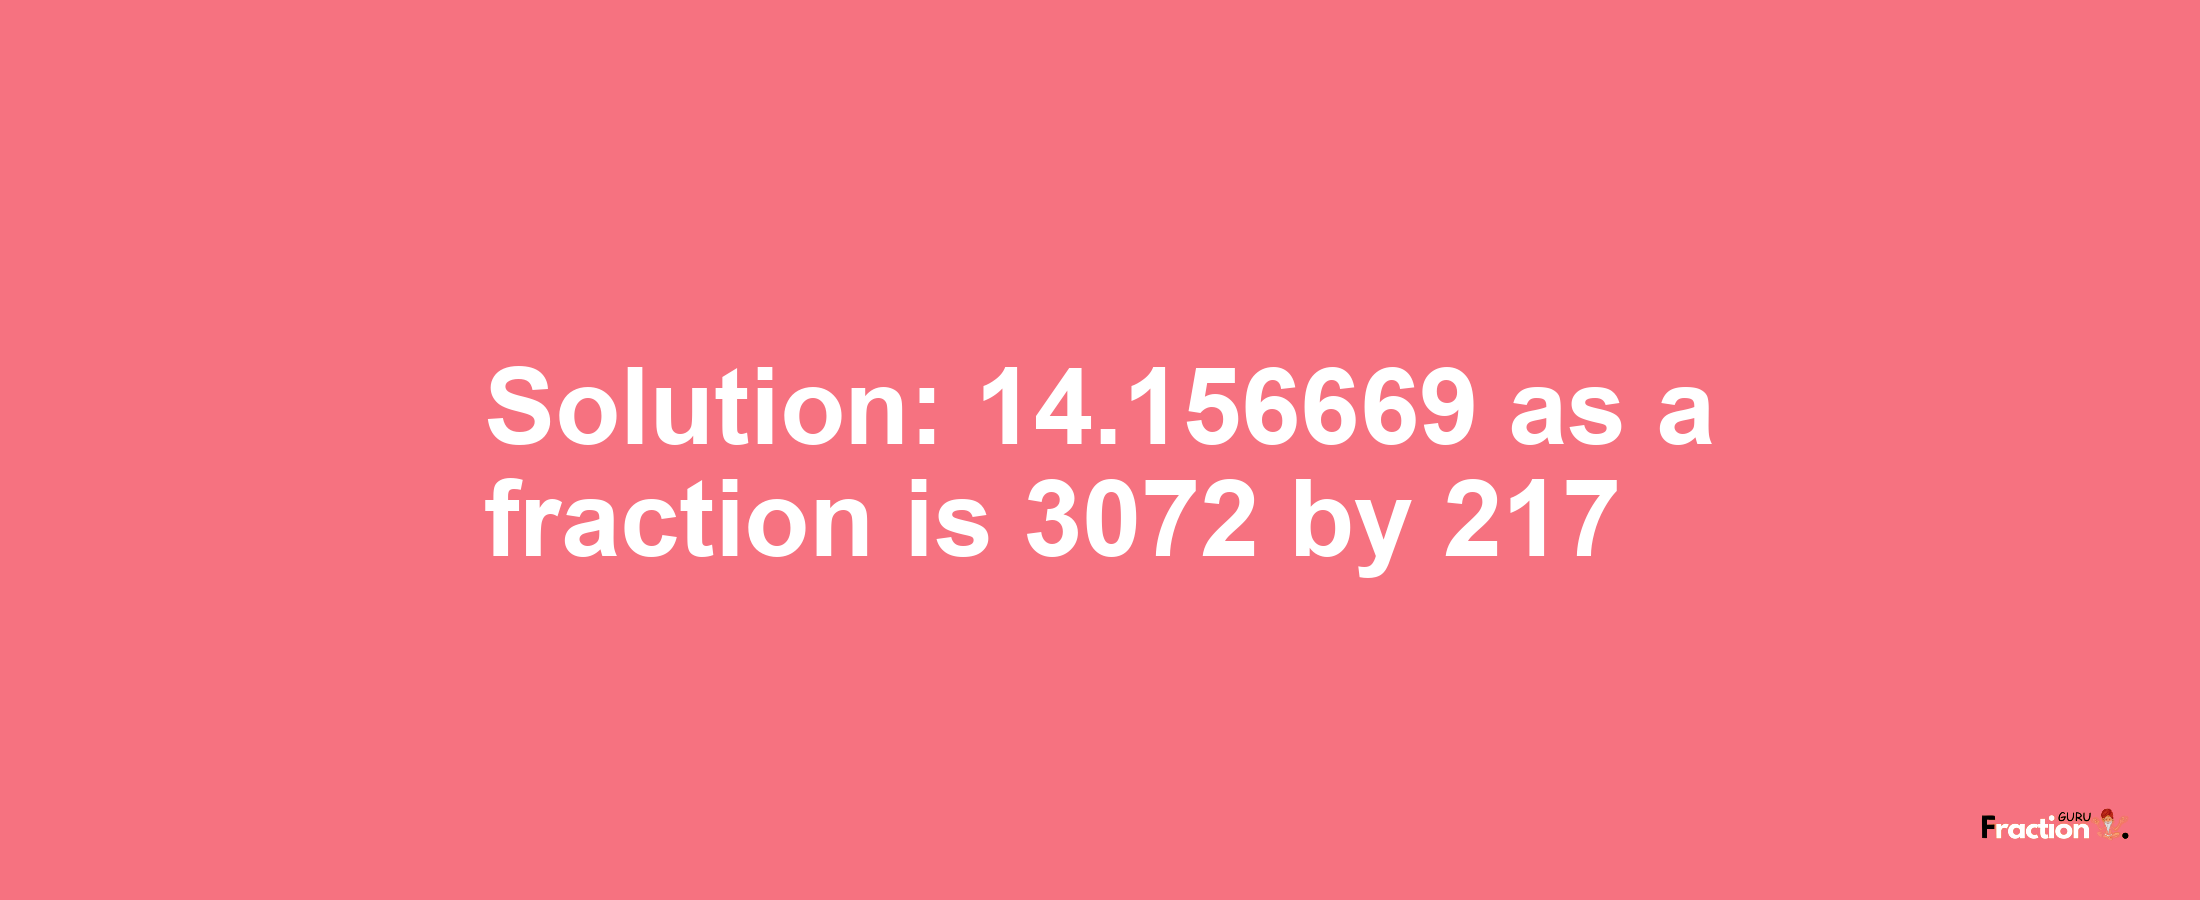 Solution:14.156669 as a fraction is 3072/217